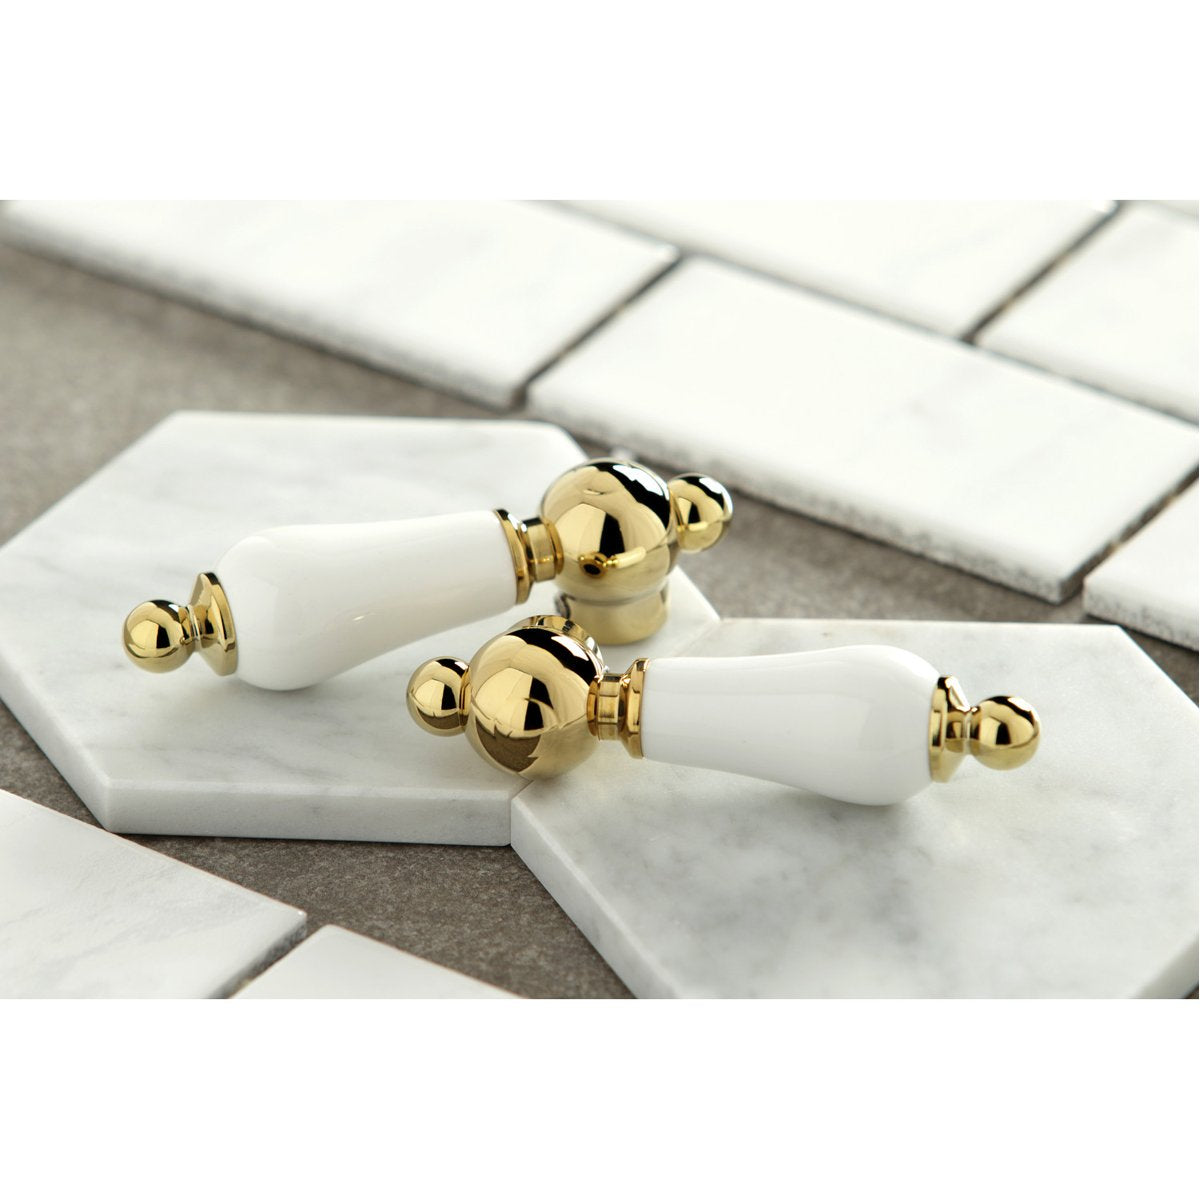 Kingston Brass Heritage 8-Inch Center Wall Mount 3-Hole Bathroom Faucet